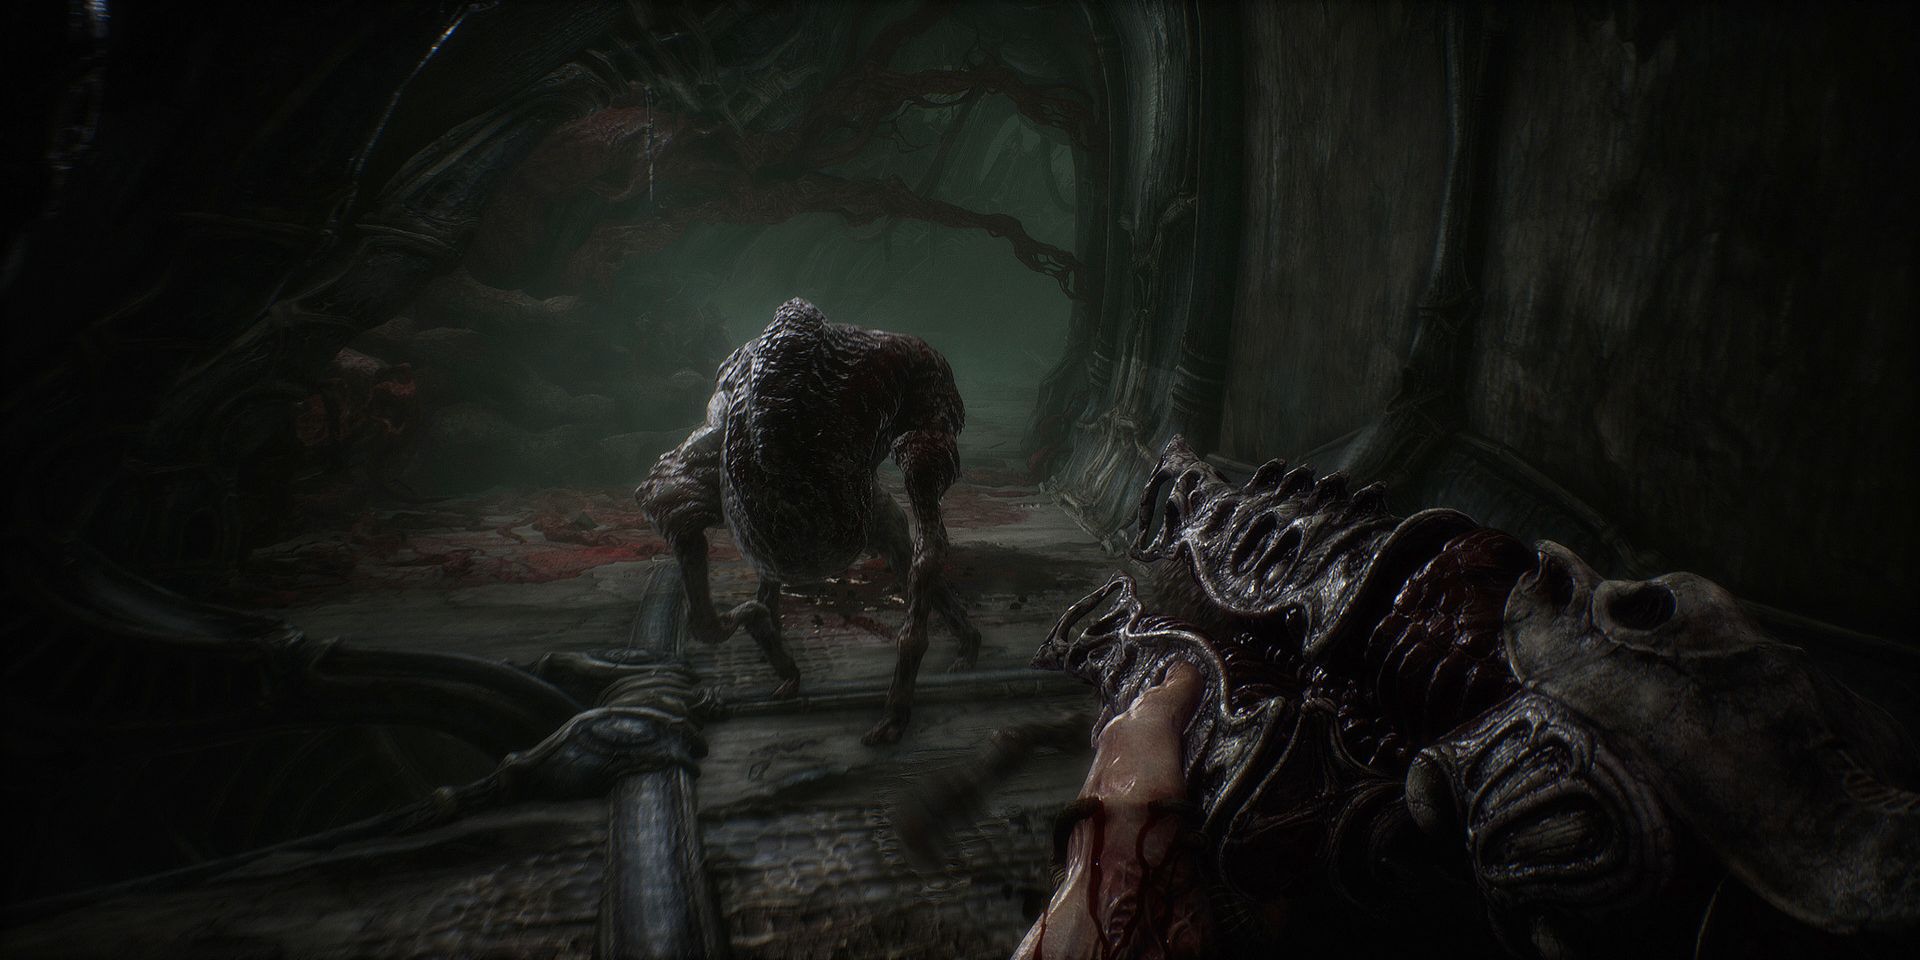 Scorn Is The Most Horrific Horror Game In Years (Even If It Isn’t Scary)